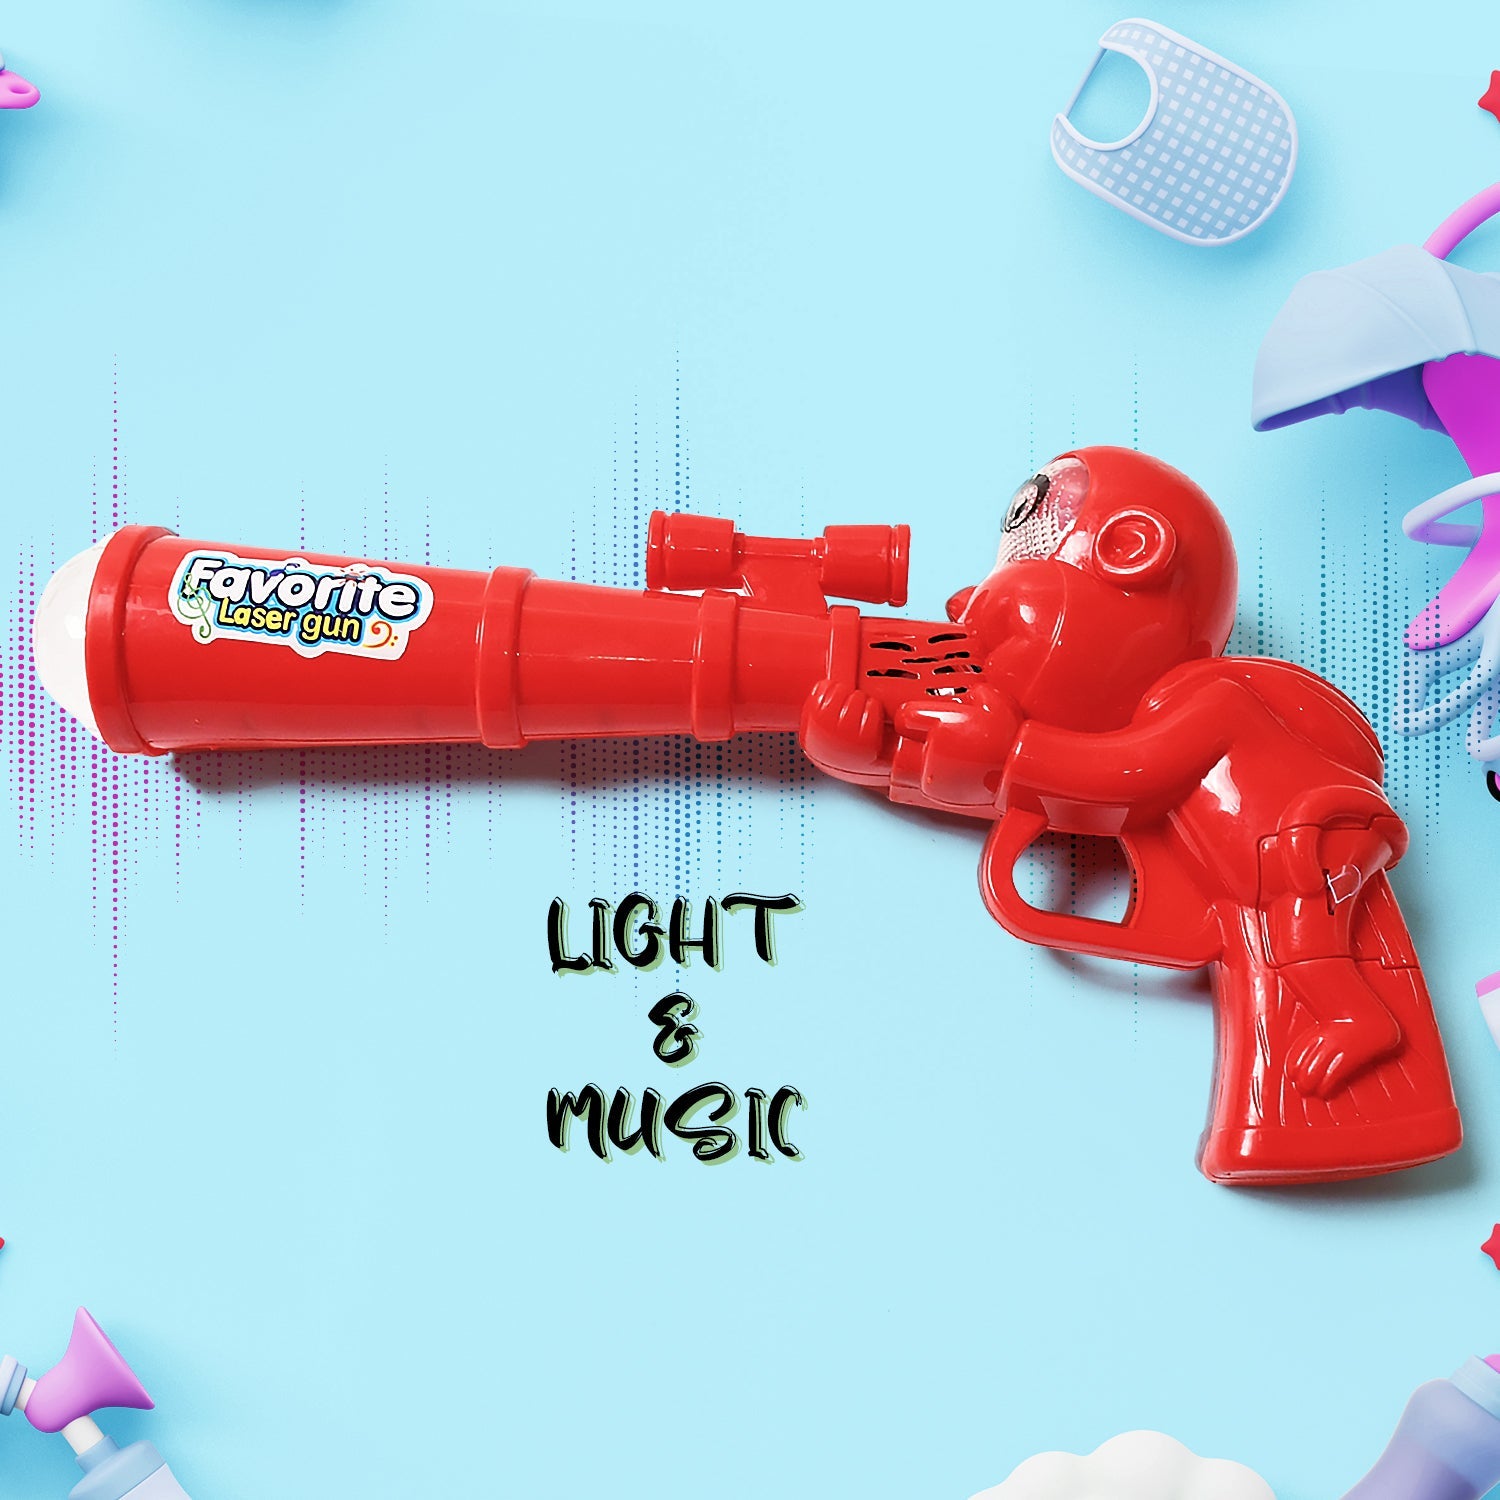 17696 Laser Gun with Musical Sound & Light Toy for Boys & Girls, Birthday Gift for Kids (Pack of 1)